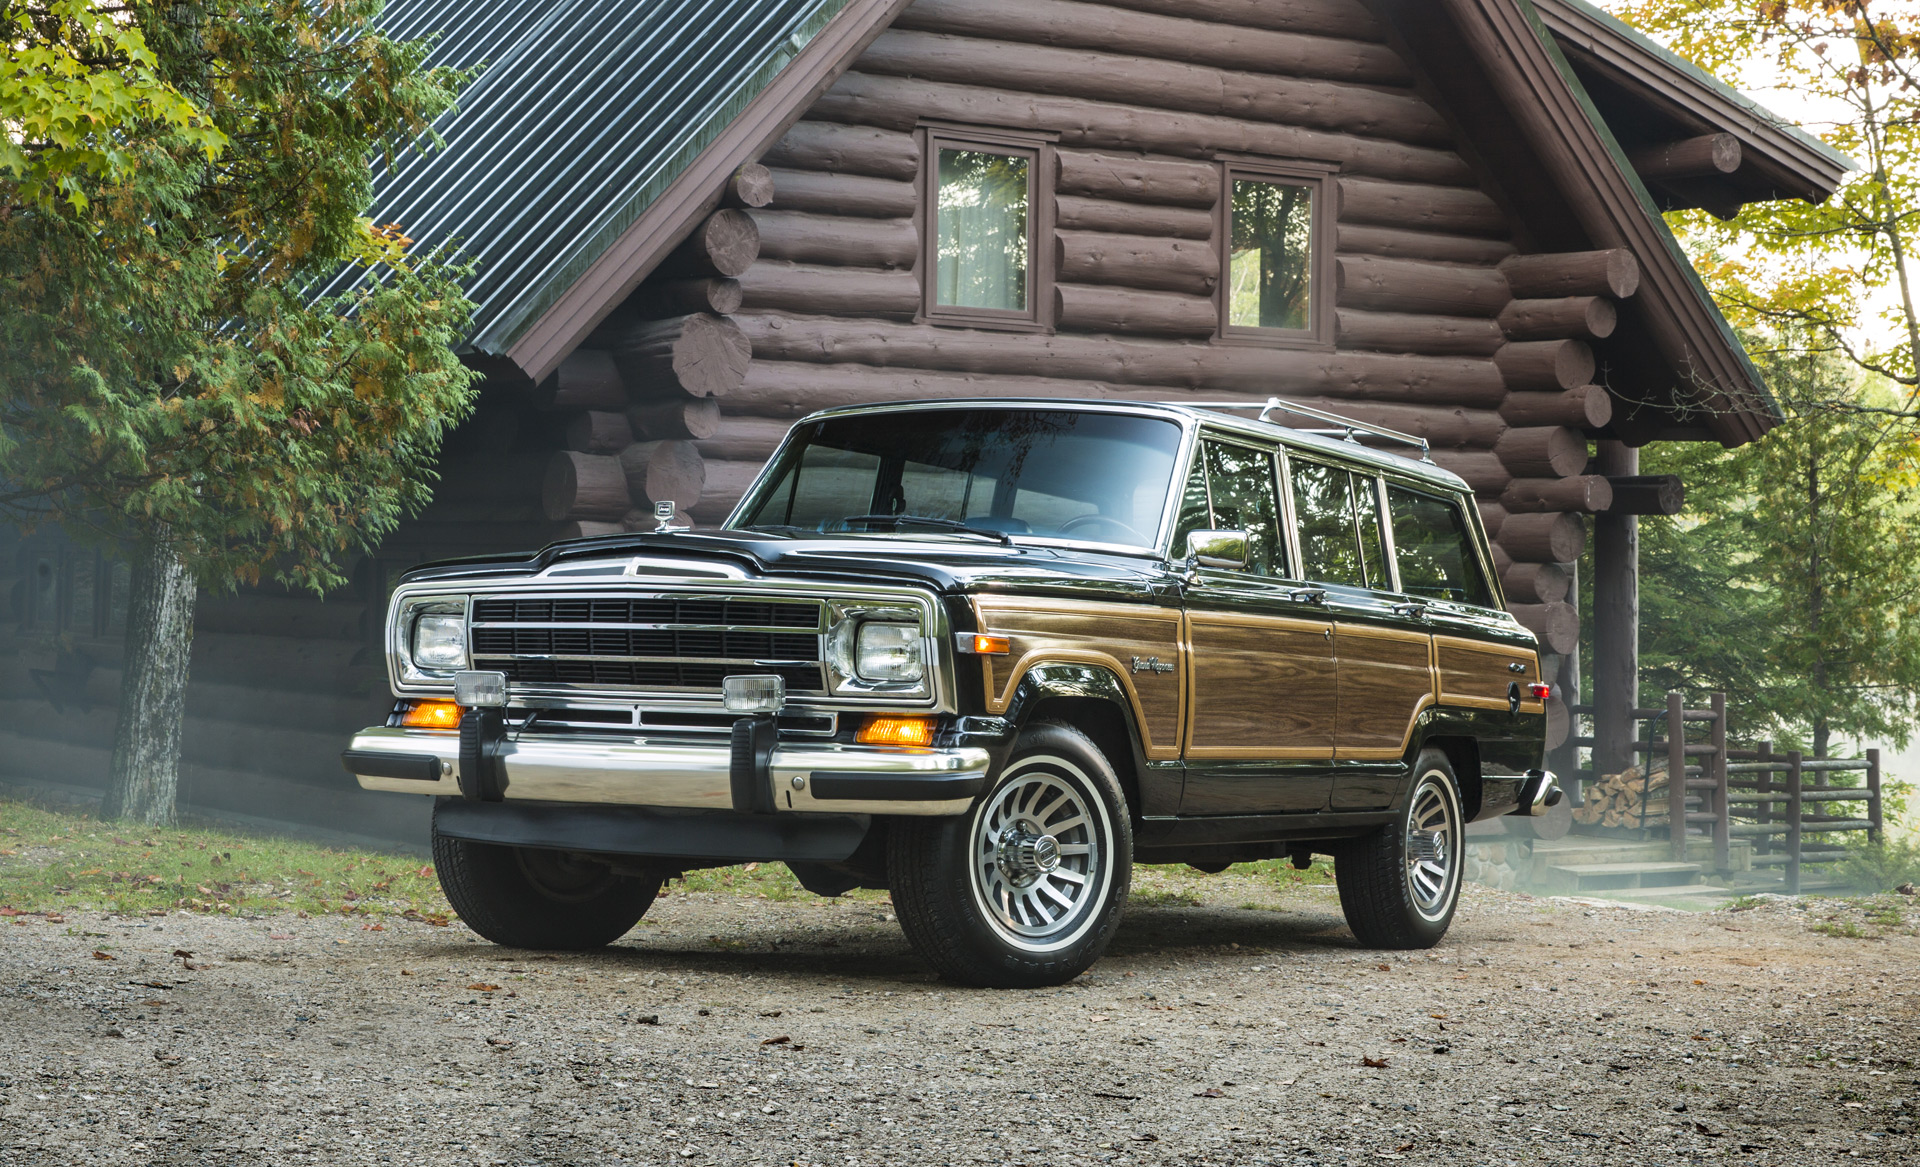 jeep-s-range-topping-grand-wagoneer-could-nudge-140k-says-ceo